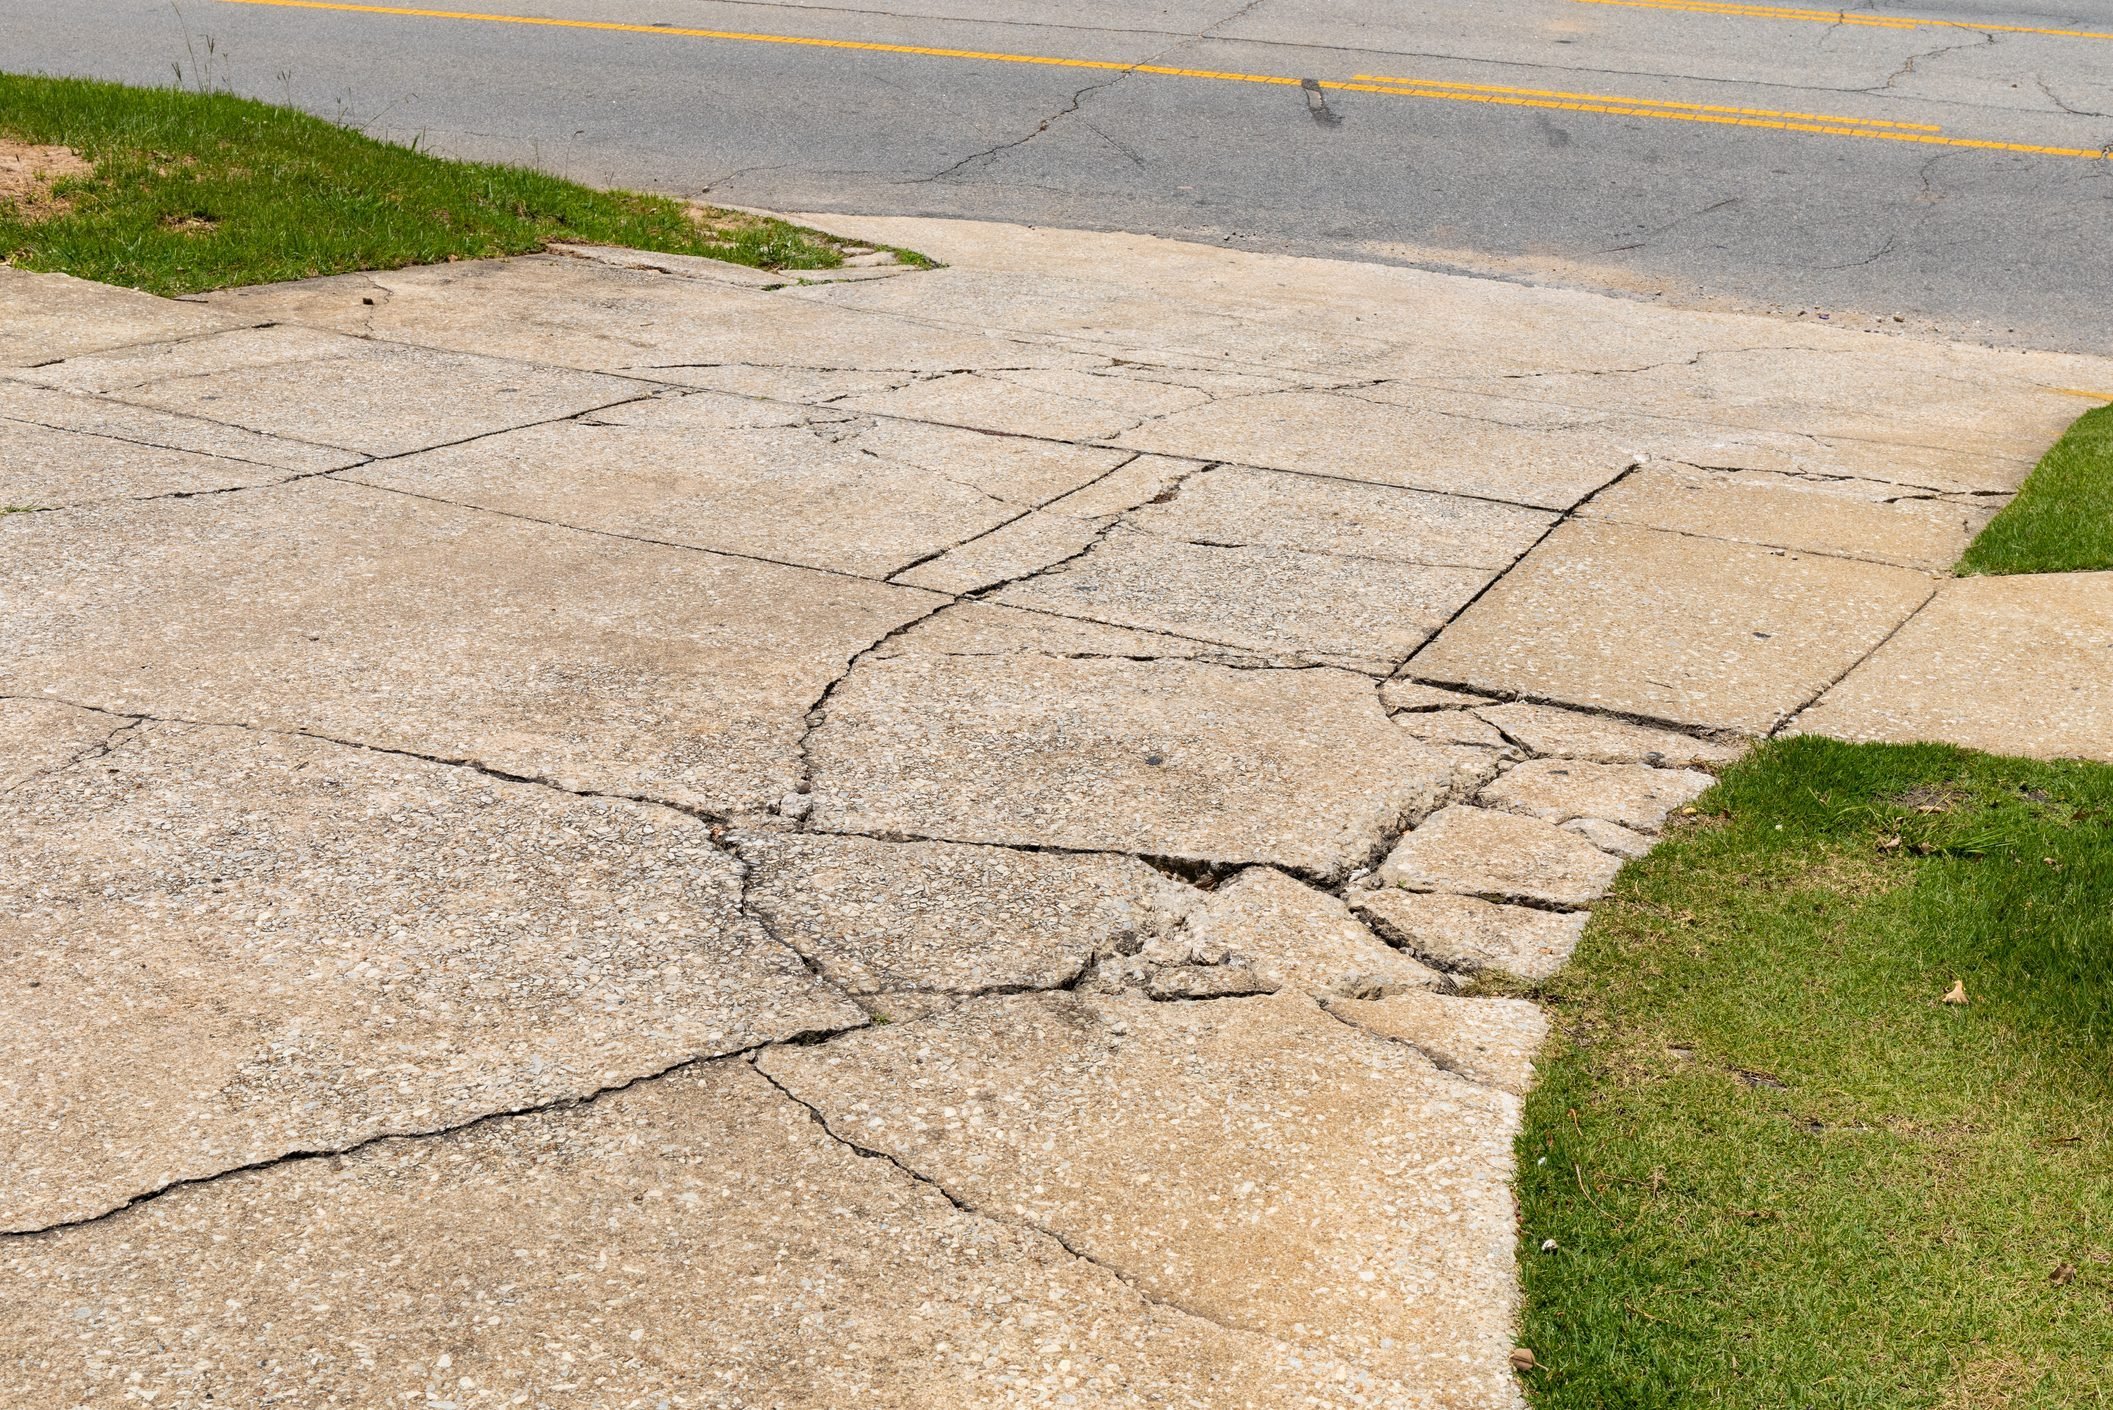 How To Fix Spalling Concrete in Your Driveway